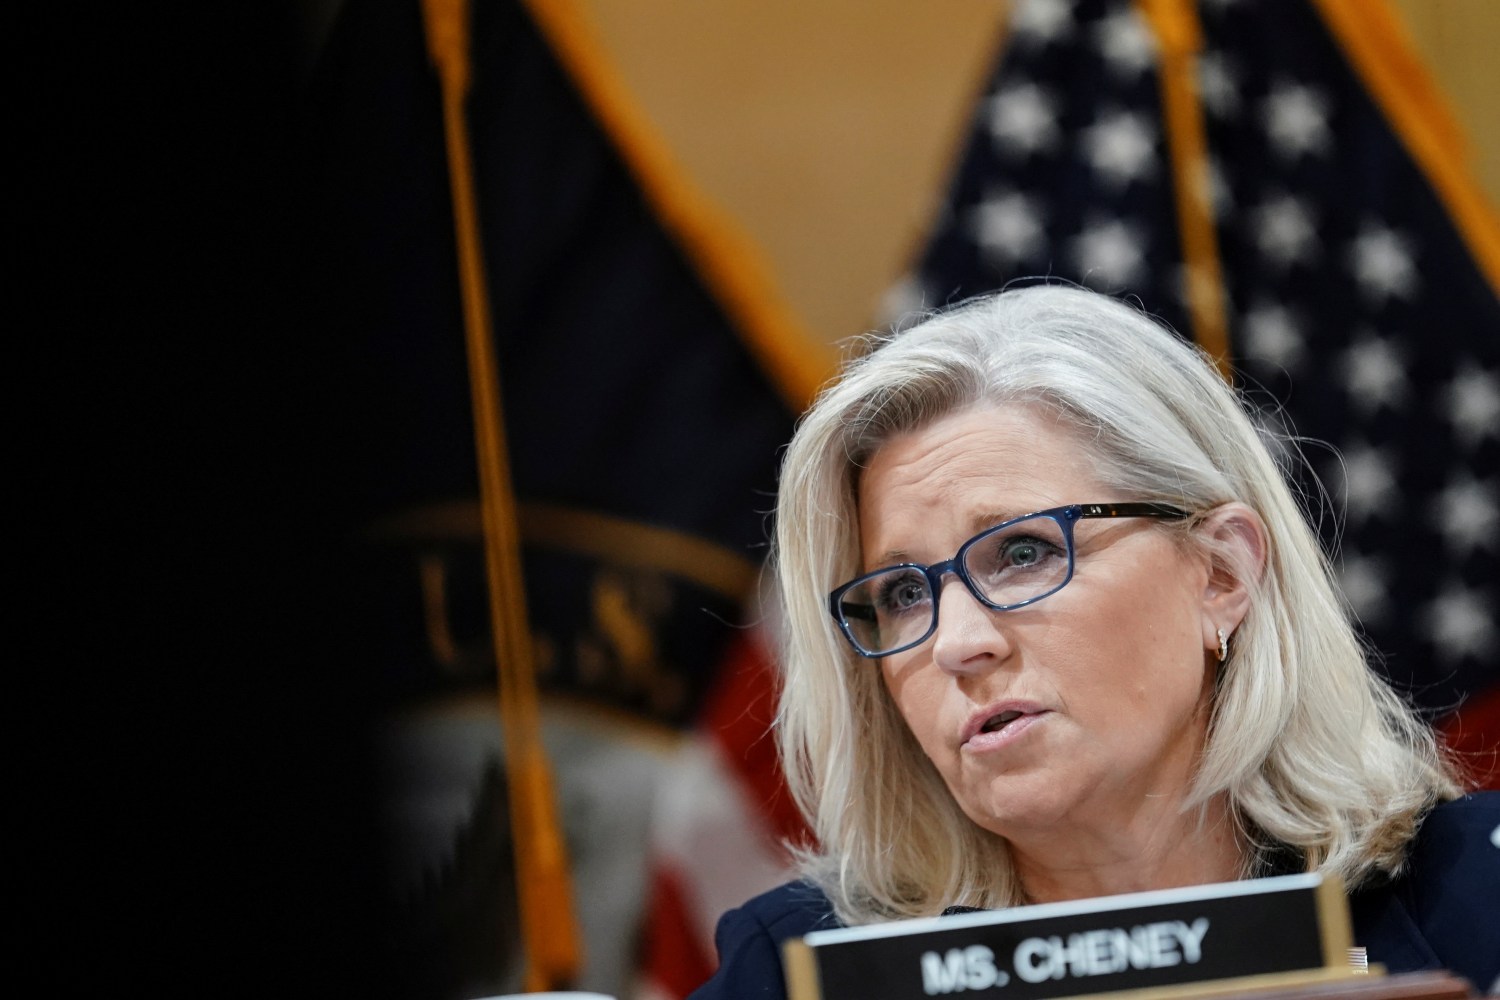 Vice Chair U.S. Representative Liz Cheney (R-WY) attends the third of eight planned public hearings of the U.S. House Select Committee to investigate the January 6 Attack on the United States Capitol, on Capitol Hill in Washington, U.S. June 16, 2022. REUTERS/Sarah Silbiger